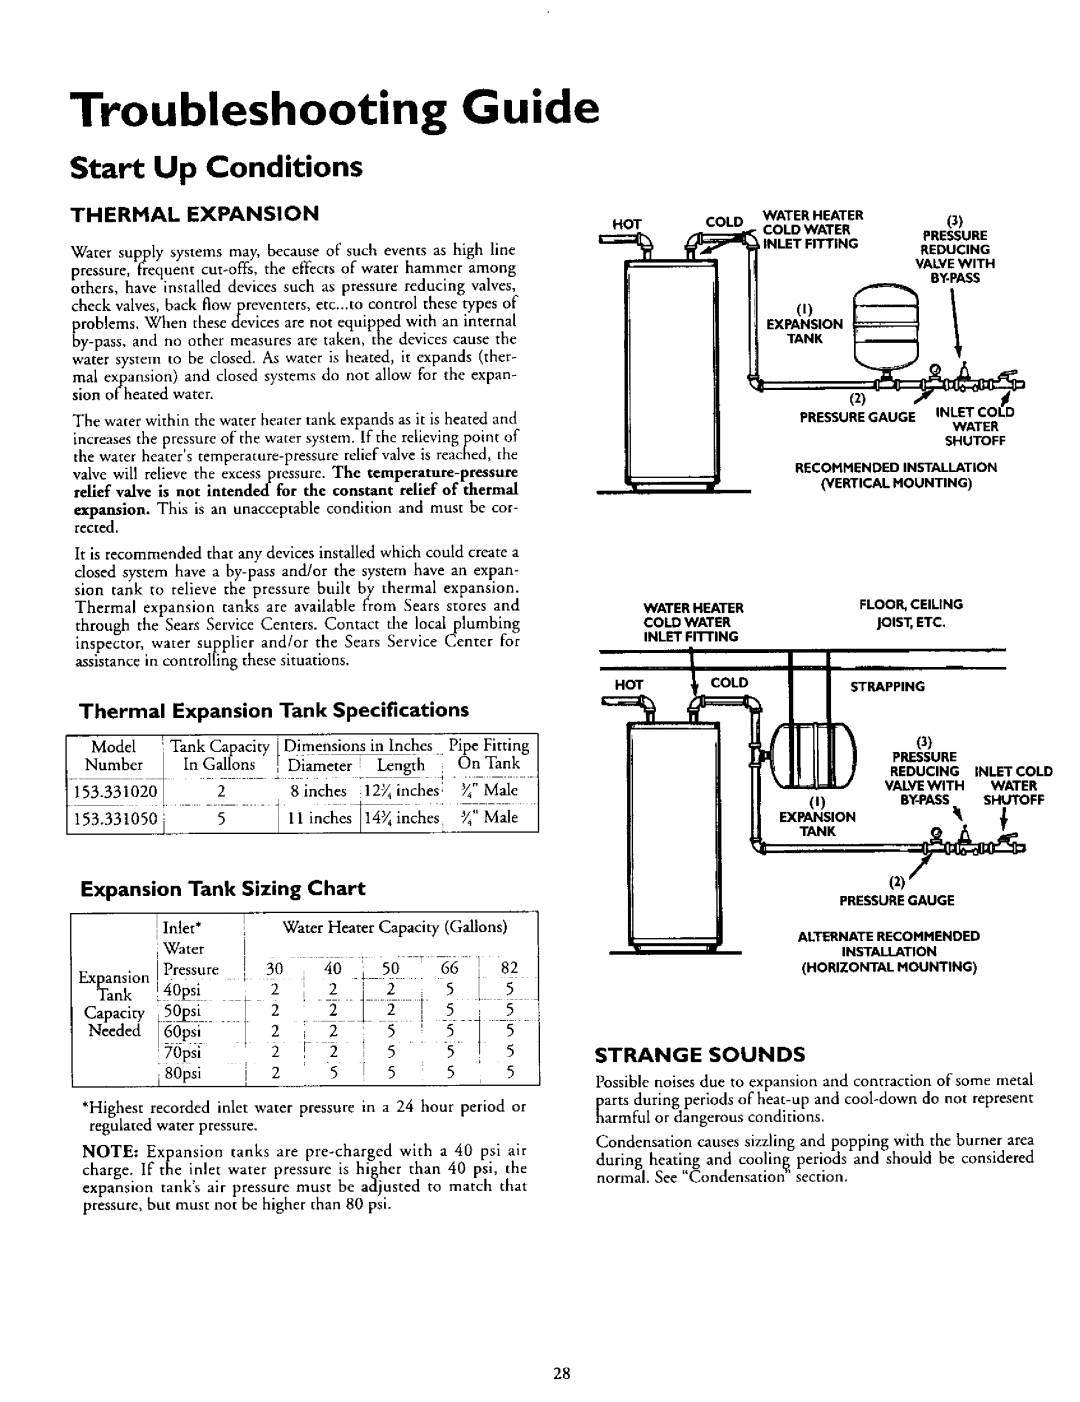 Kenmore 153.335862 Troubleshooting Guide, 1153.33i0505 i Hiochesil inches Ma,e, 0psi, Start Up Conditions, Expansion Tank 